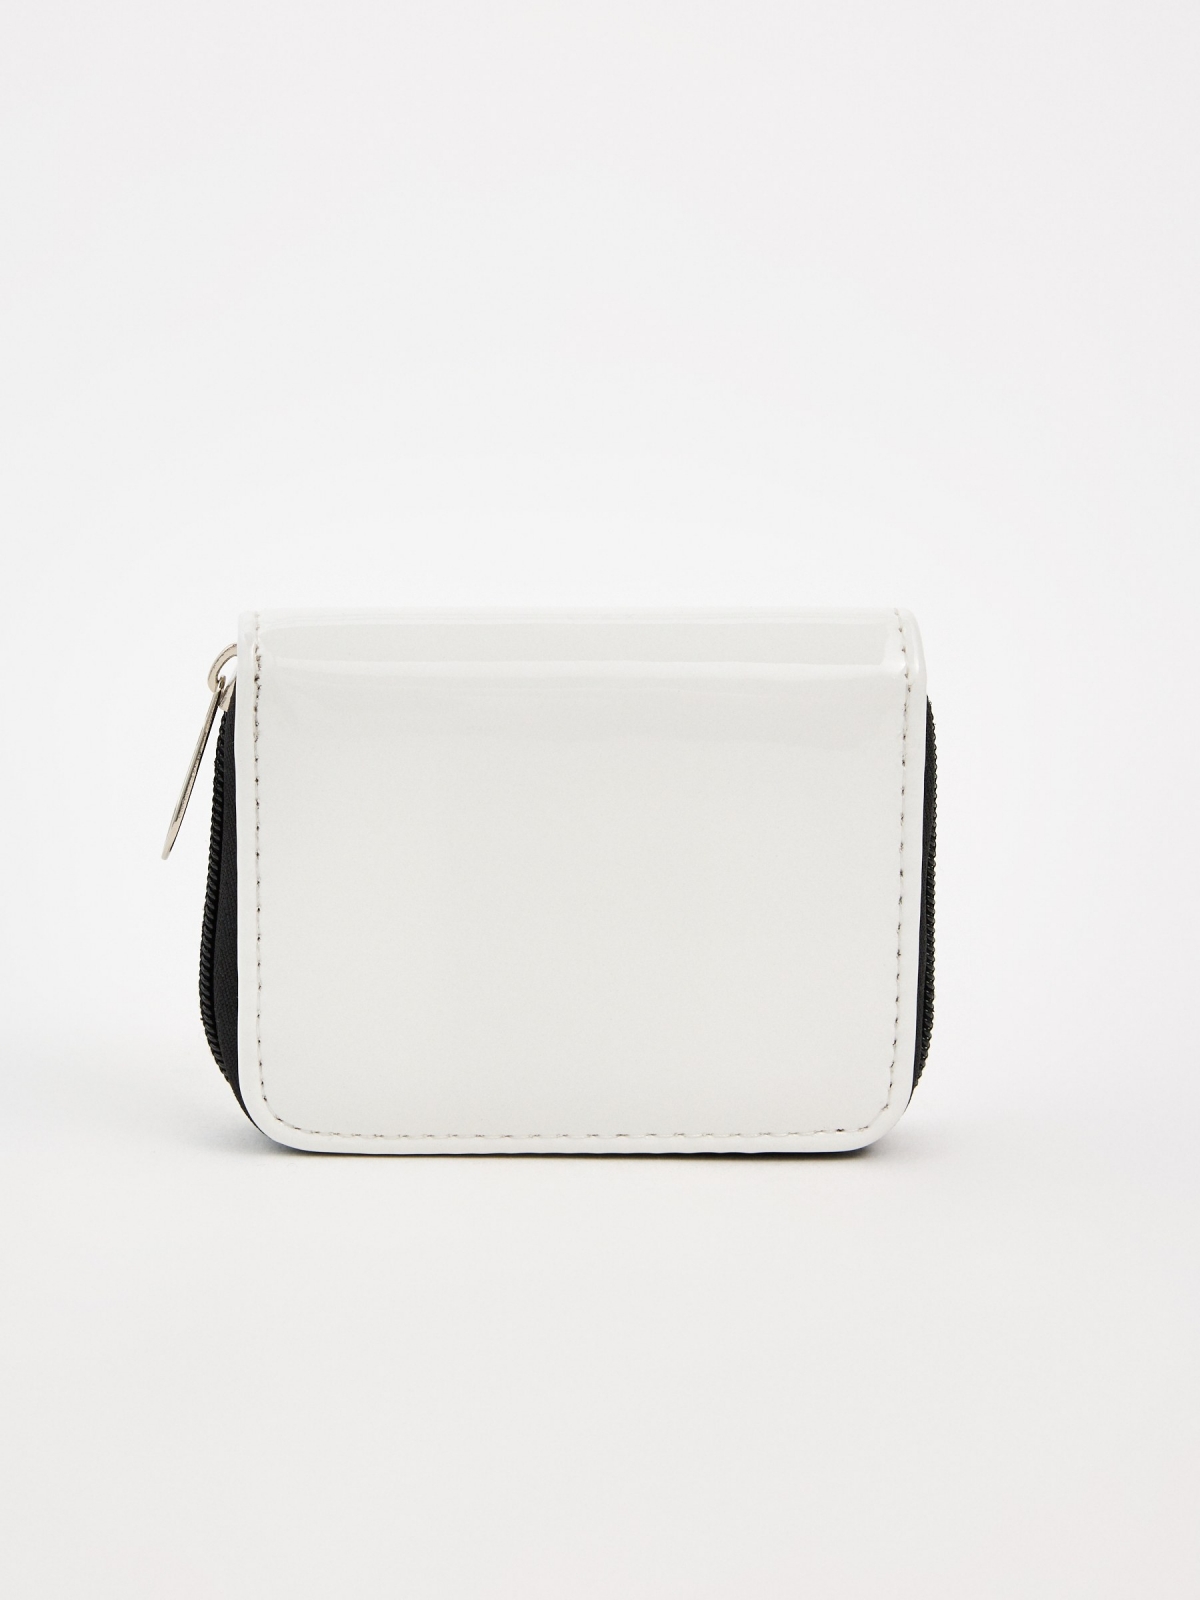 Zipped patent leather purse white detail view